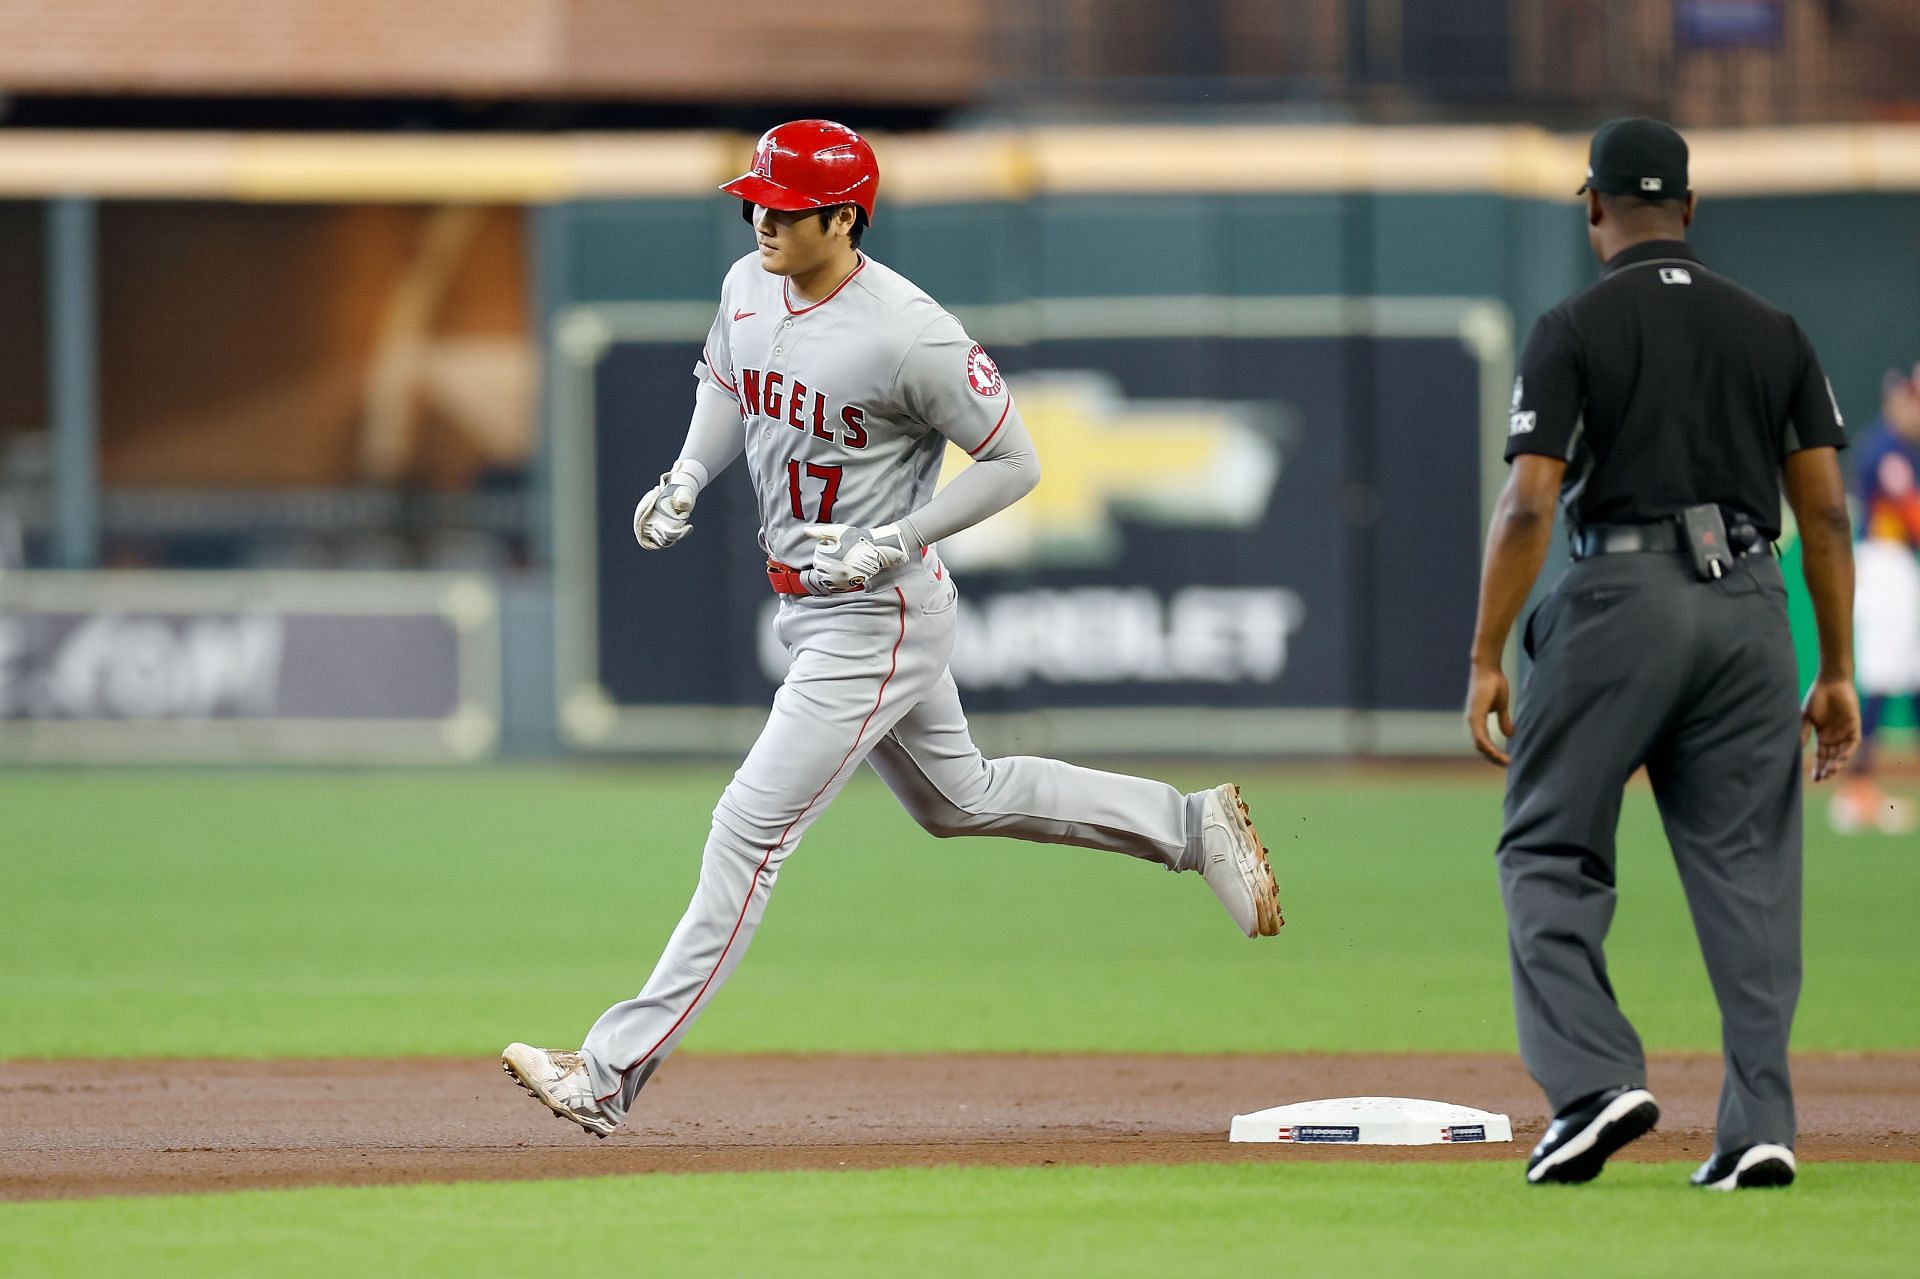 Angels' Ohtani's versatility has case for him to claim MVP again